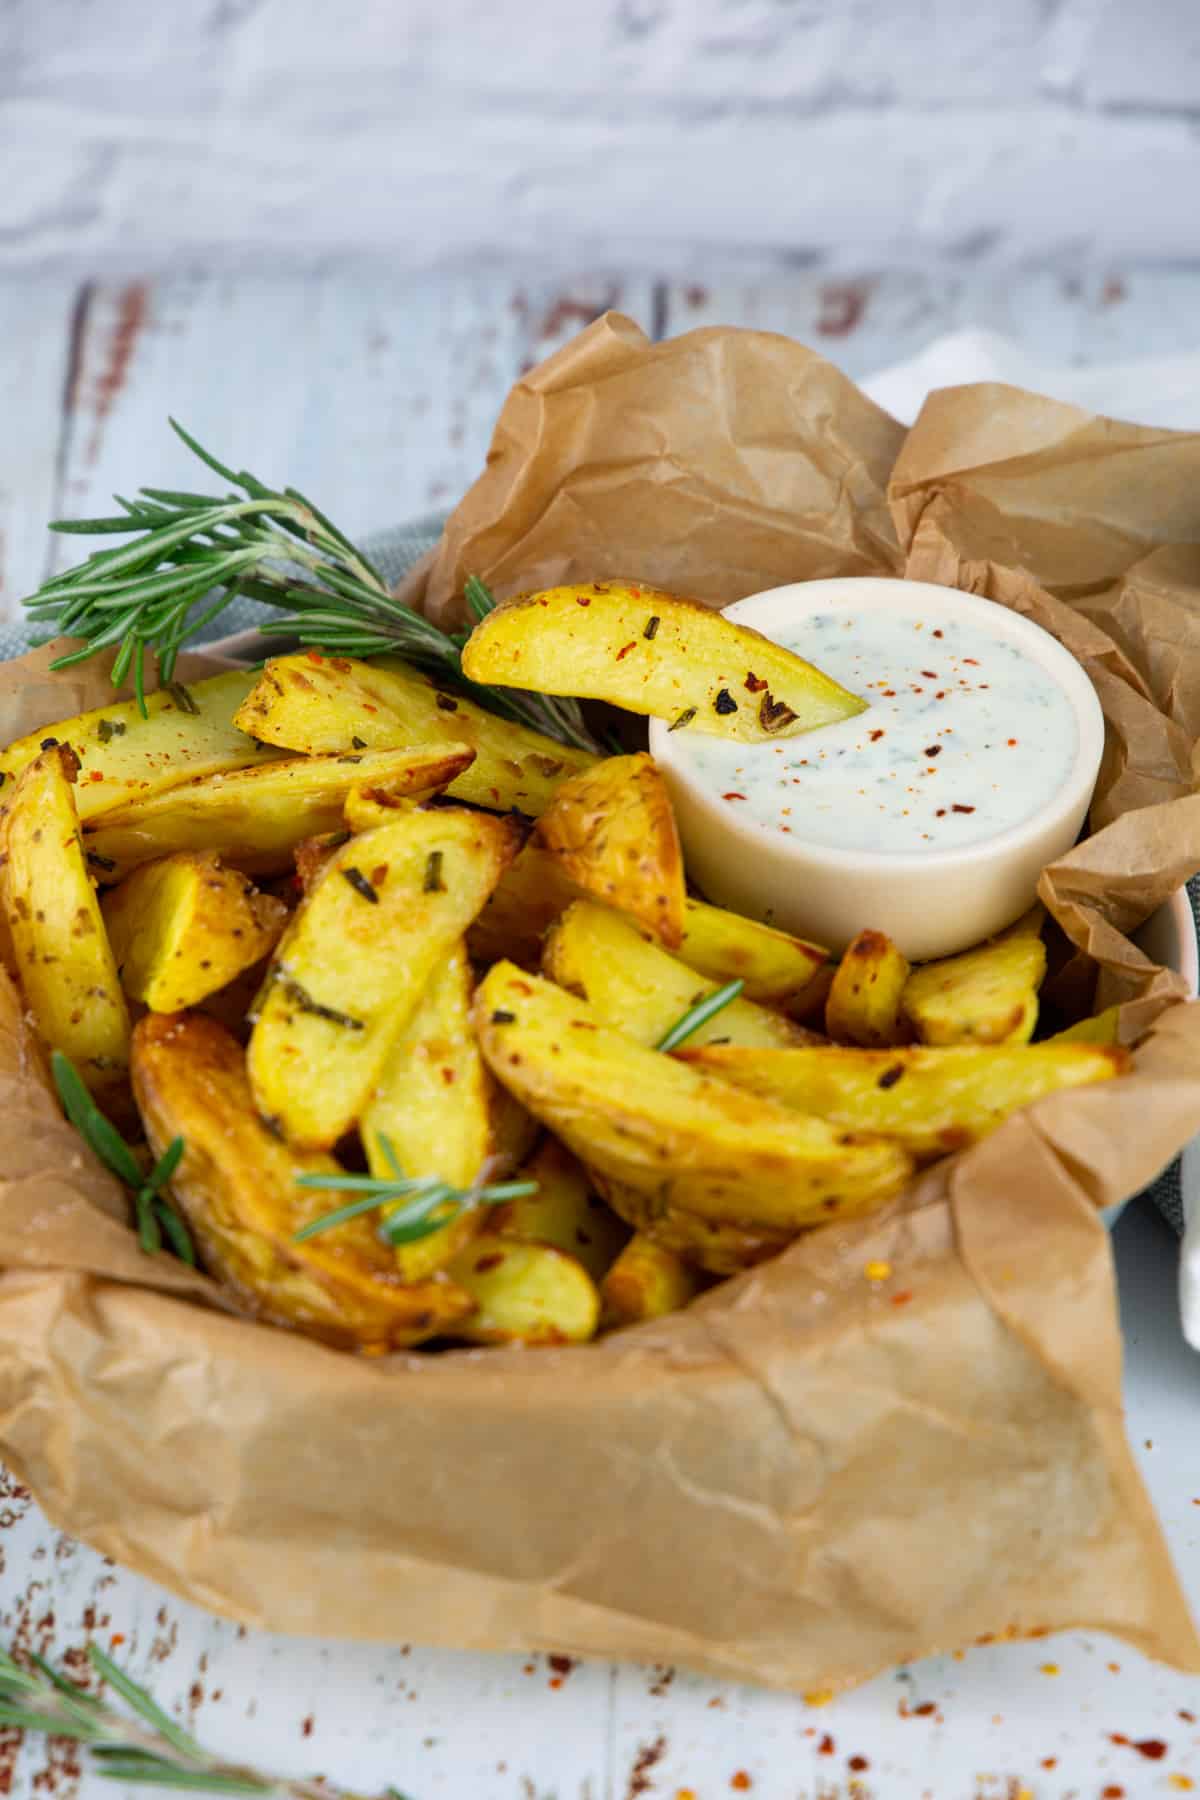 Rosemary potatoes in parchment paper with a small bowl of yogurt dip on the side